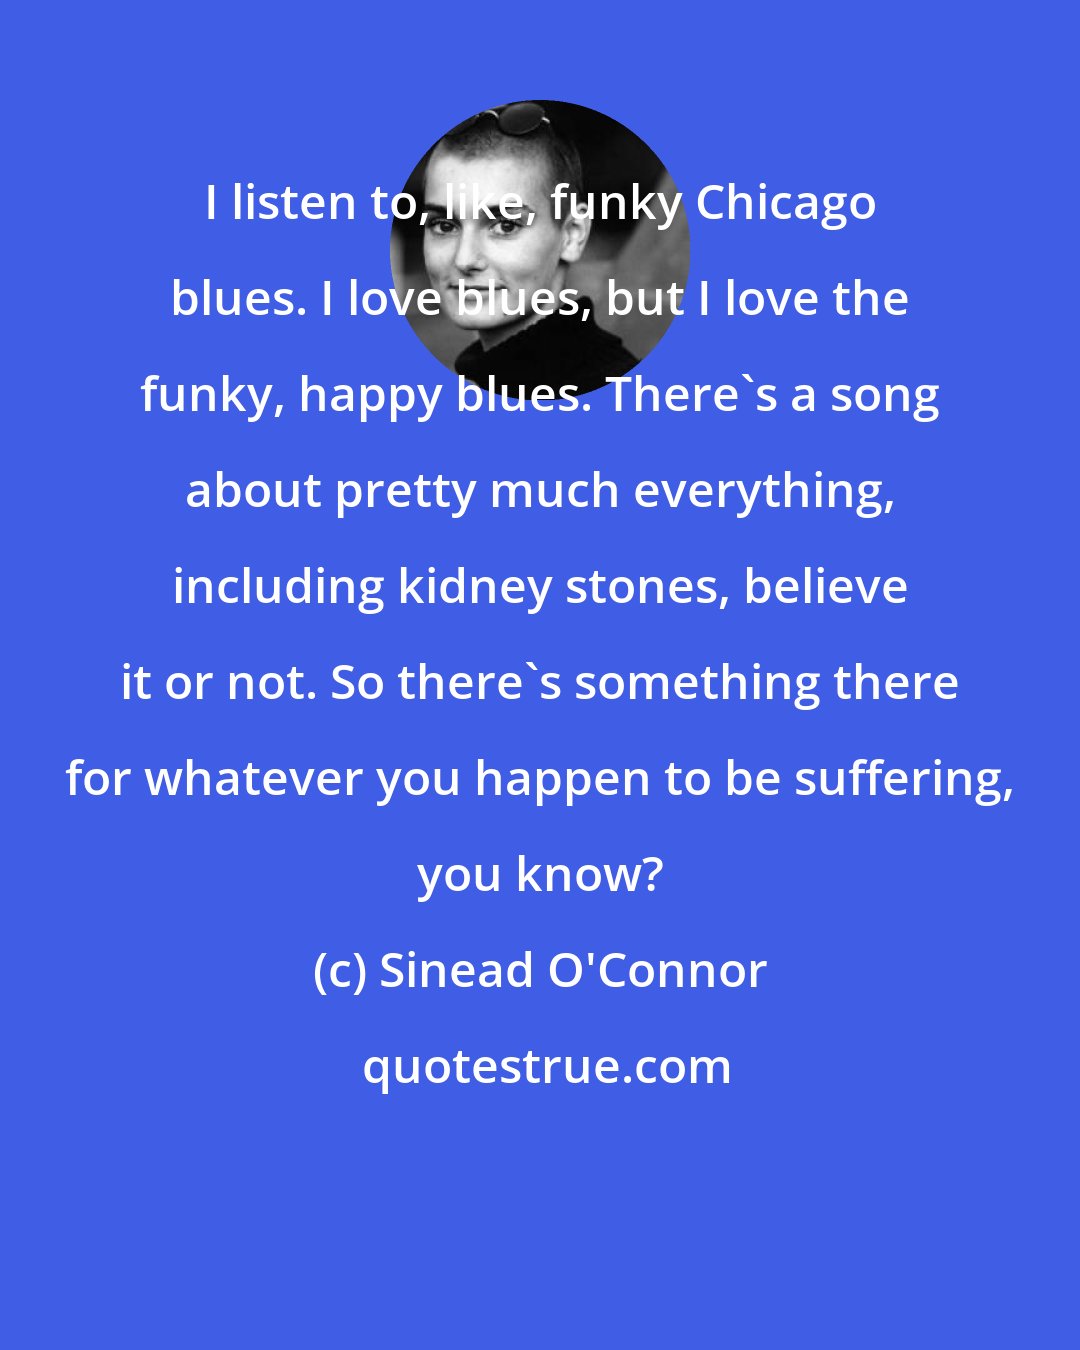 Sinead O'Connor: I listen to, like, funky Chicago blues. I love blues, but I love the funky, happy blues. There's a song about pretty much everything, including kidney stones, believe it or not. So there's something there for whatever you happen to be suffering, you know?